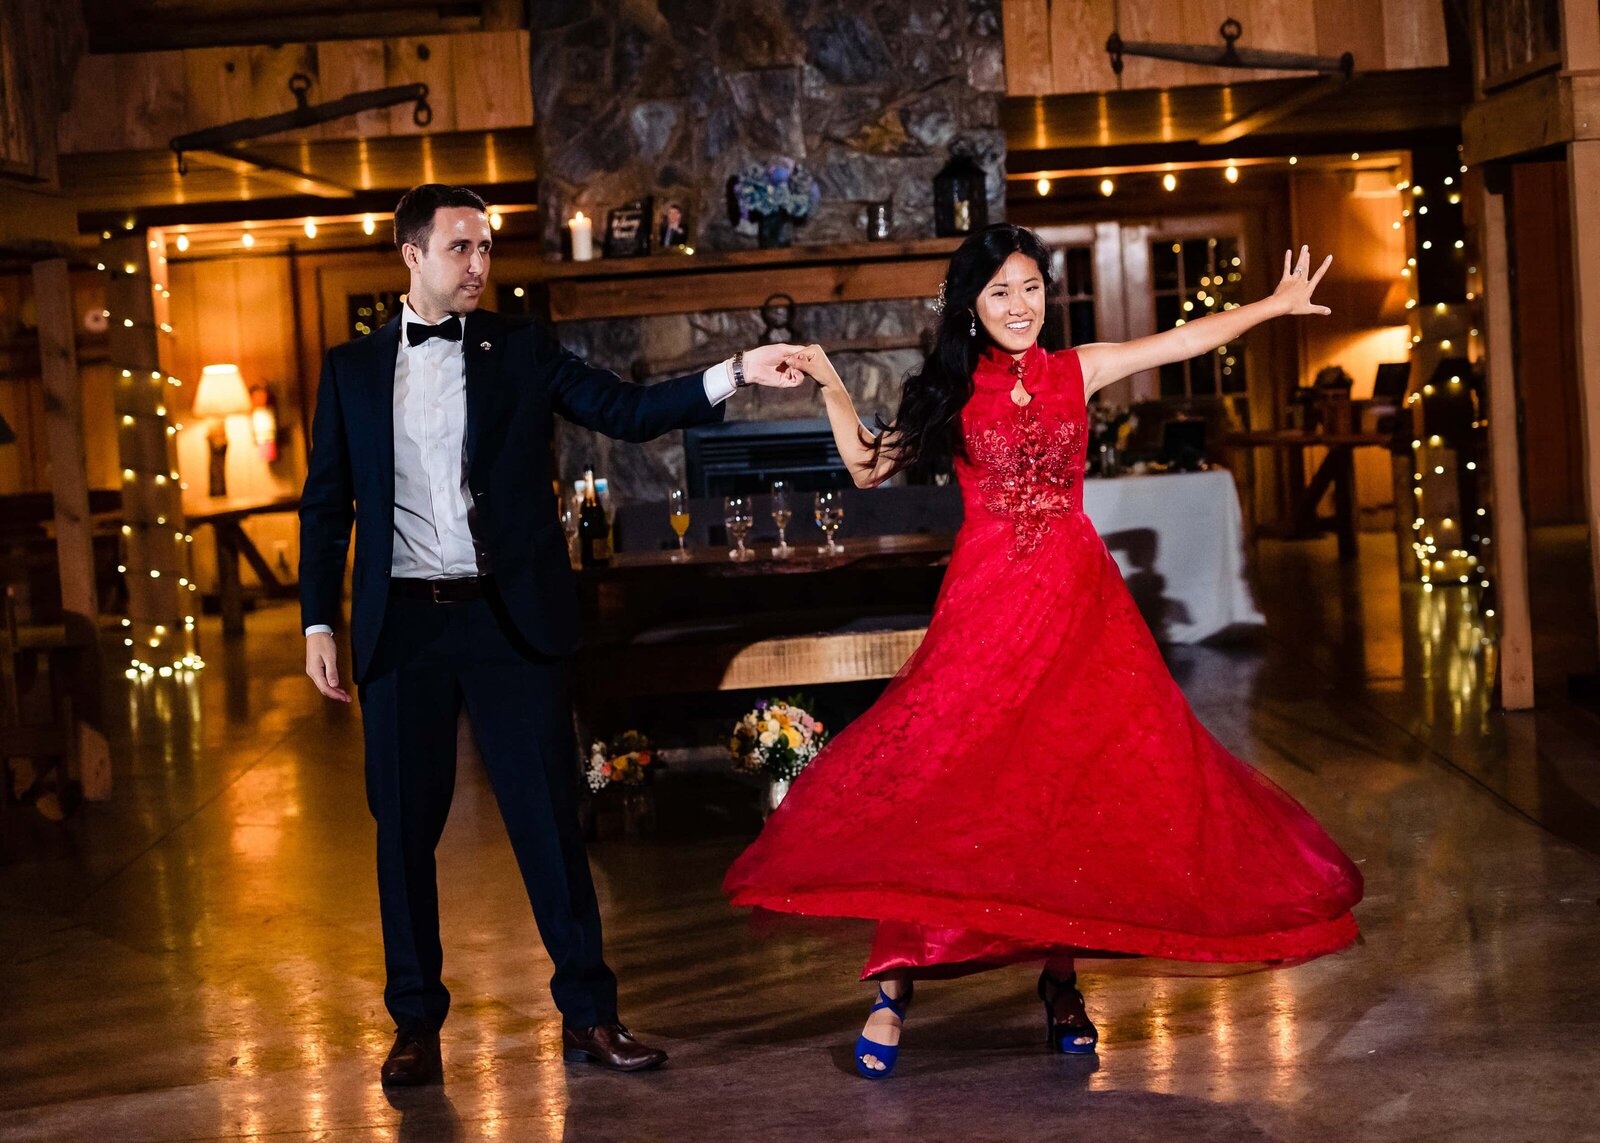 bride in a traditional red Chinese wedding dress twirls during her first dance; groom is wearing a black tuxedo